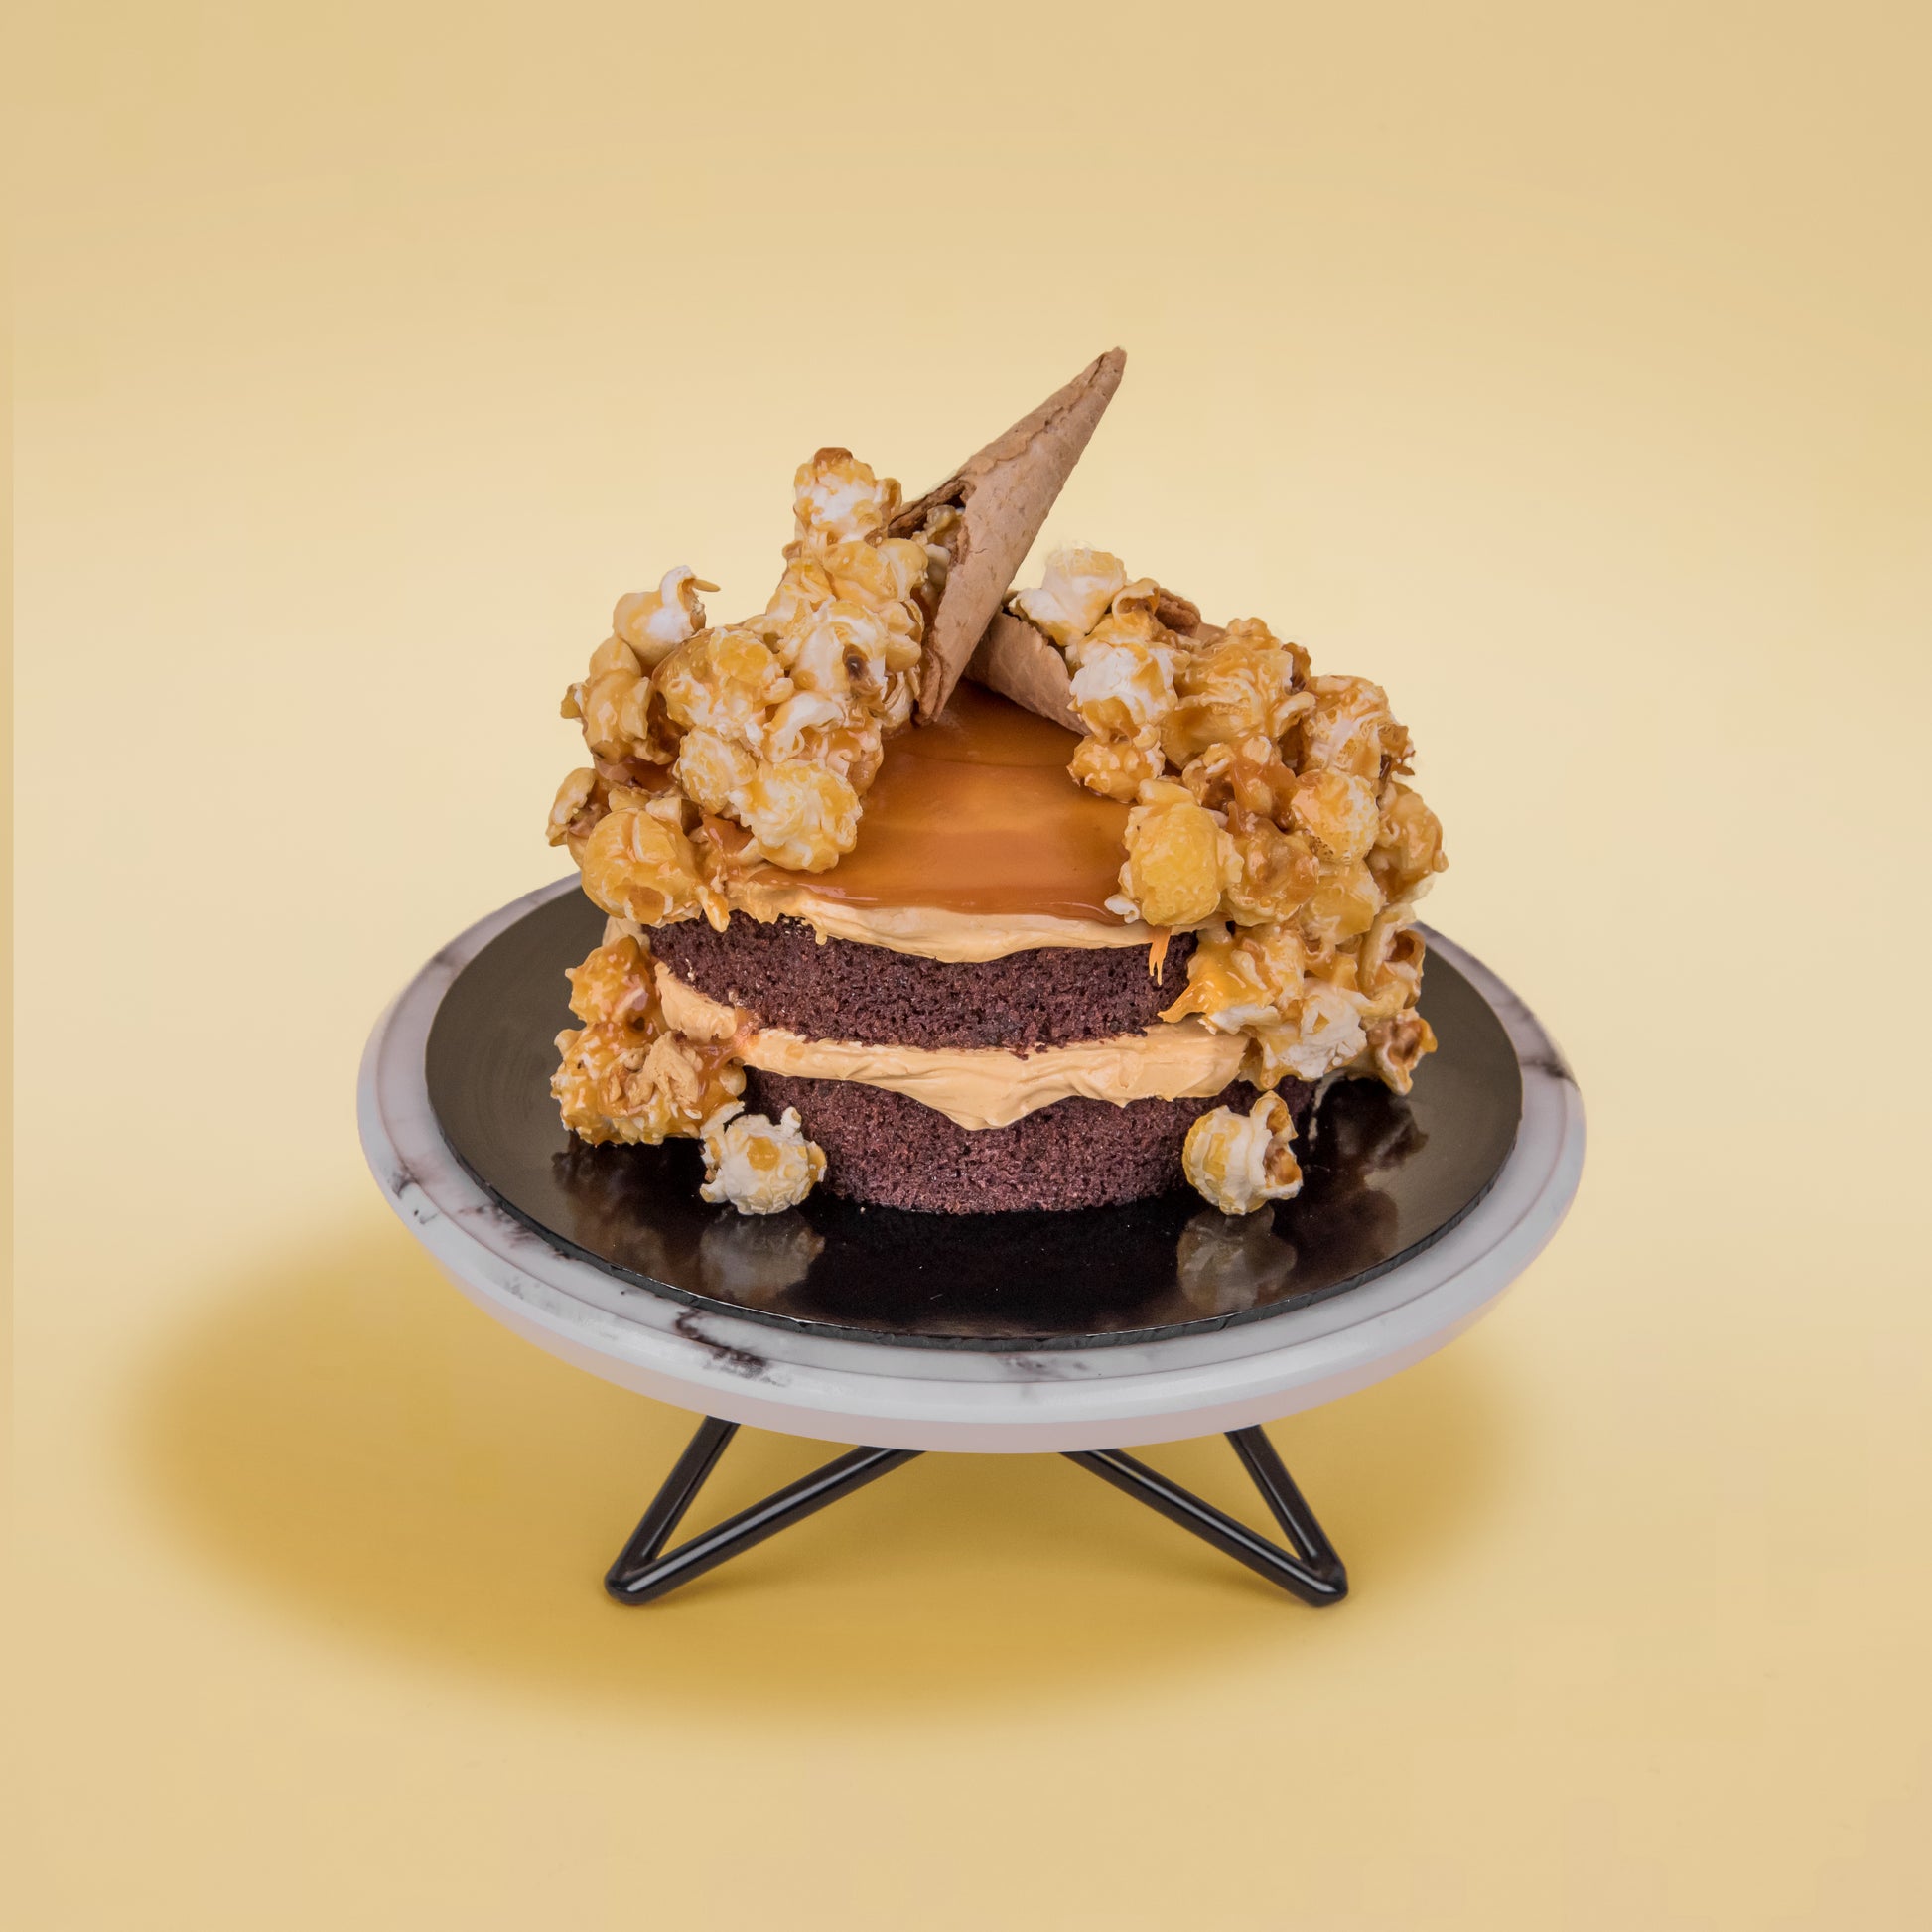 Top View of Salted Caramel Chocolate Cake with Popcorns on Top (Mini Popstar Cake by Elevete Patisserie)